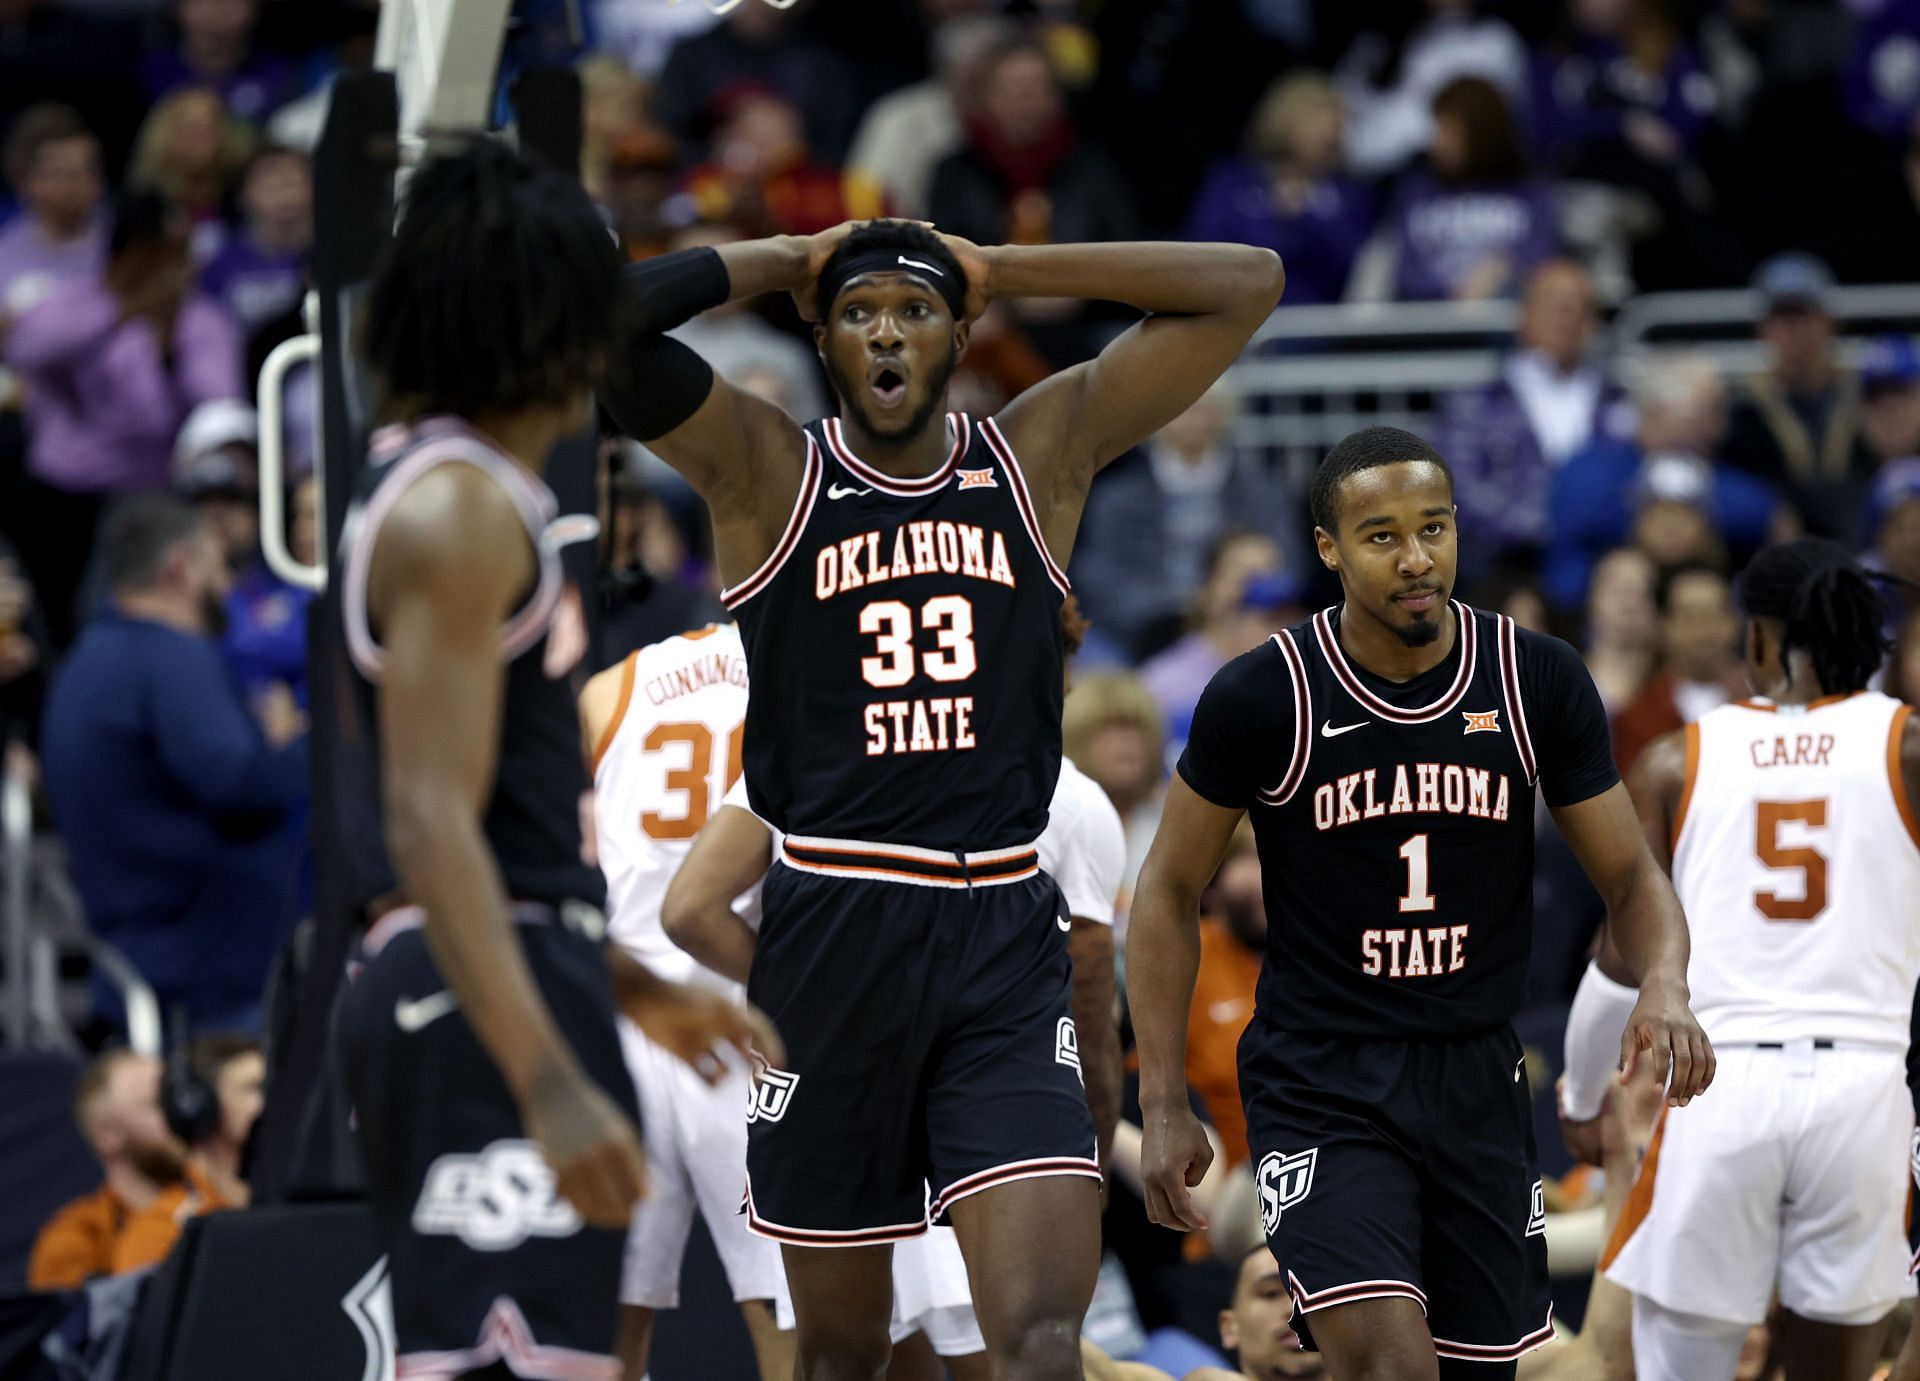 What is a Quad 1 win in college basketball? Explaining its significance